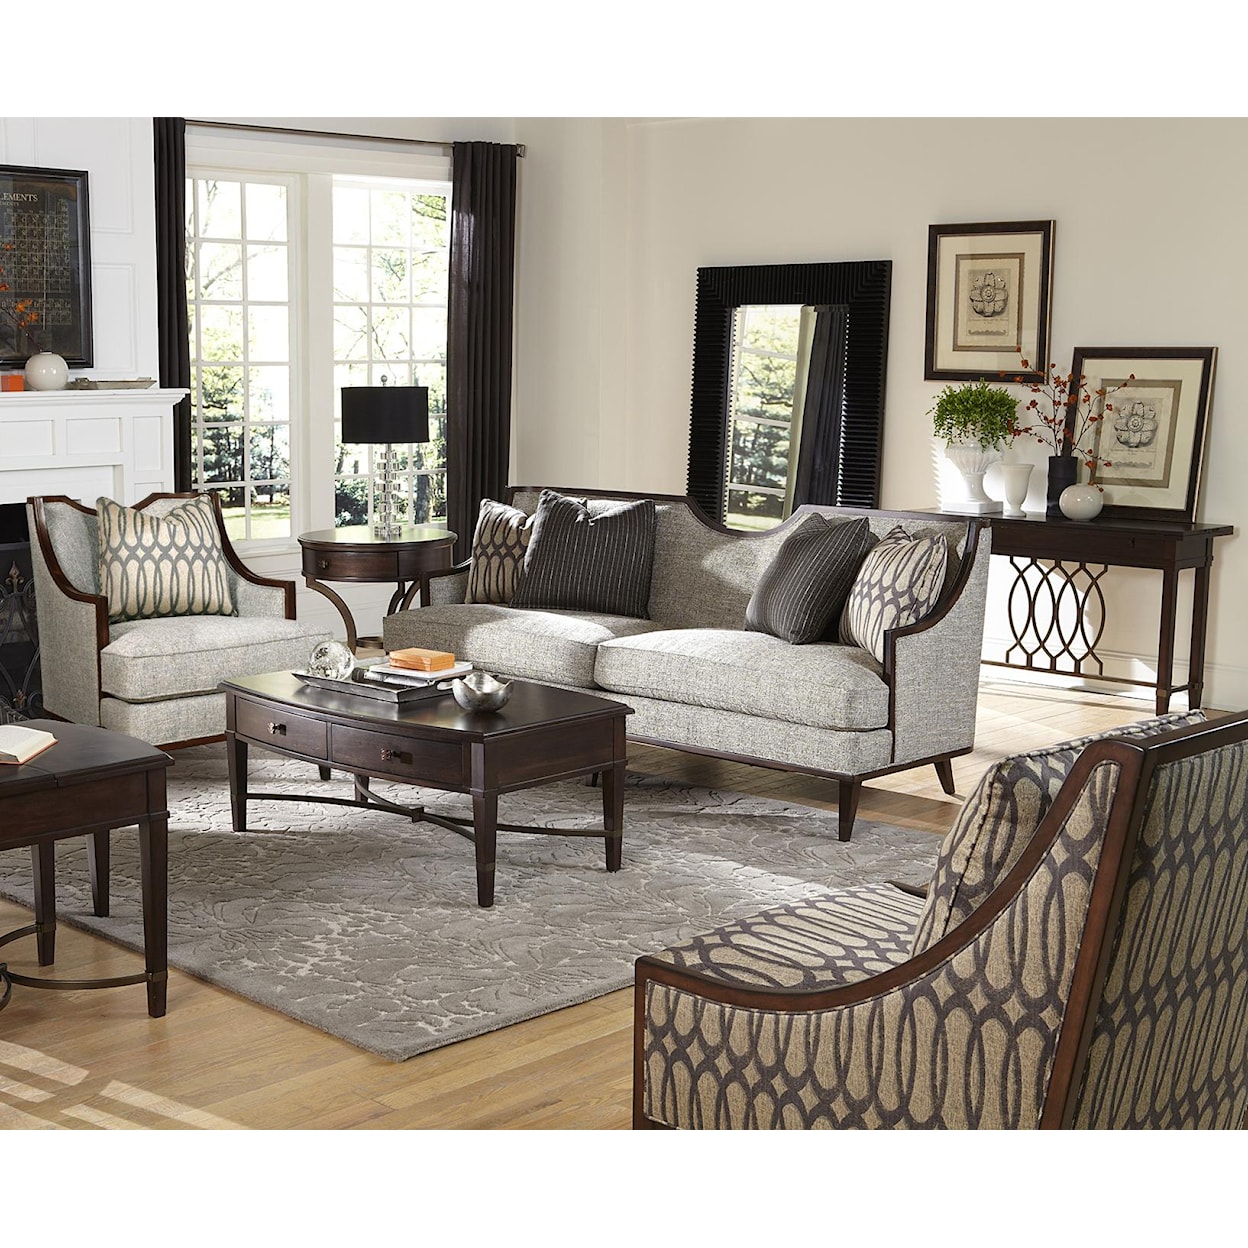 A.R.T. Furniture Inc Intrigue Harper Stationary Living Room Group